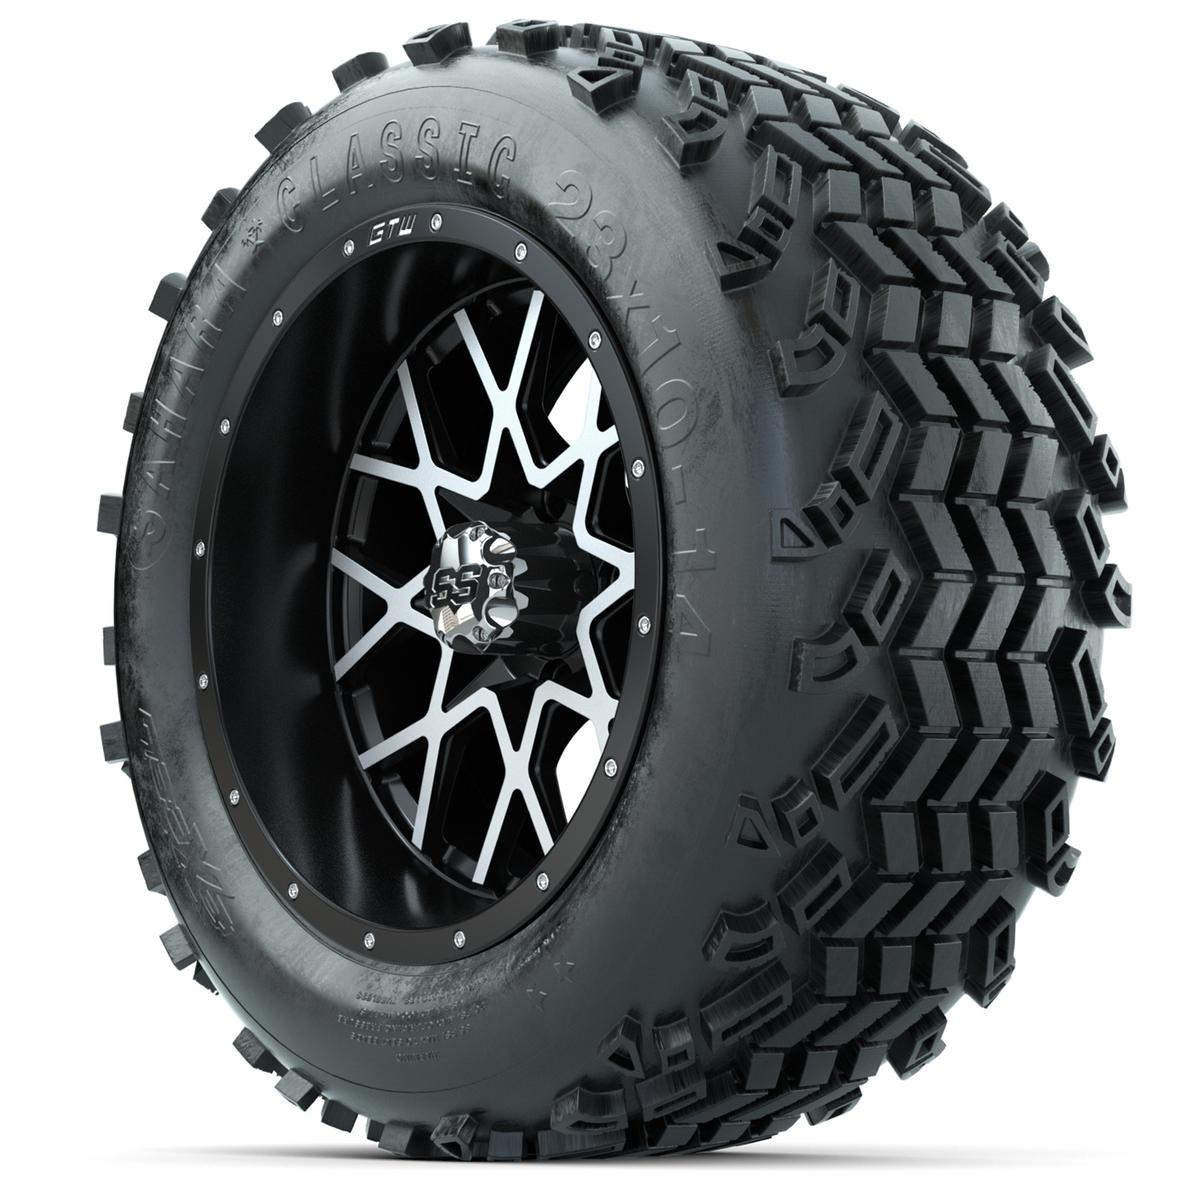 Set of (4) 14 in GTW Vortex Wheels with 23x10-14 Sahara Classic All-Terrain Tires